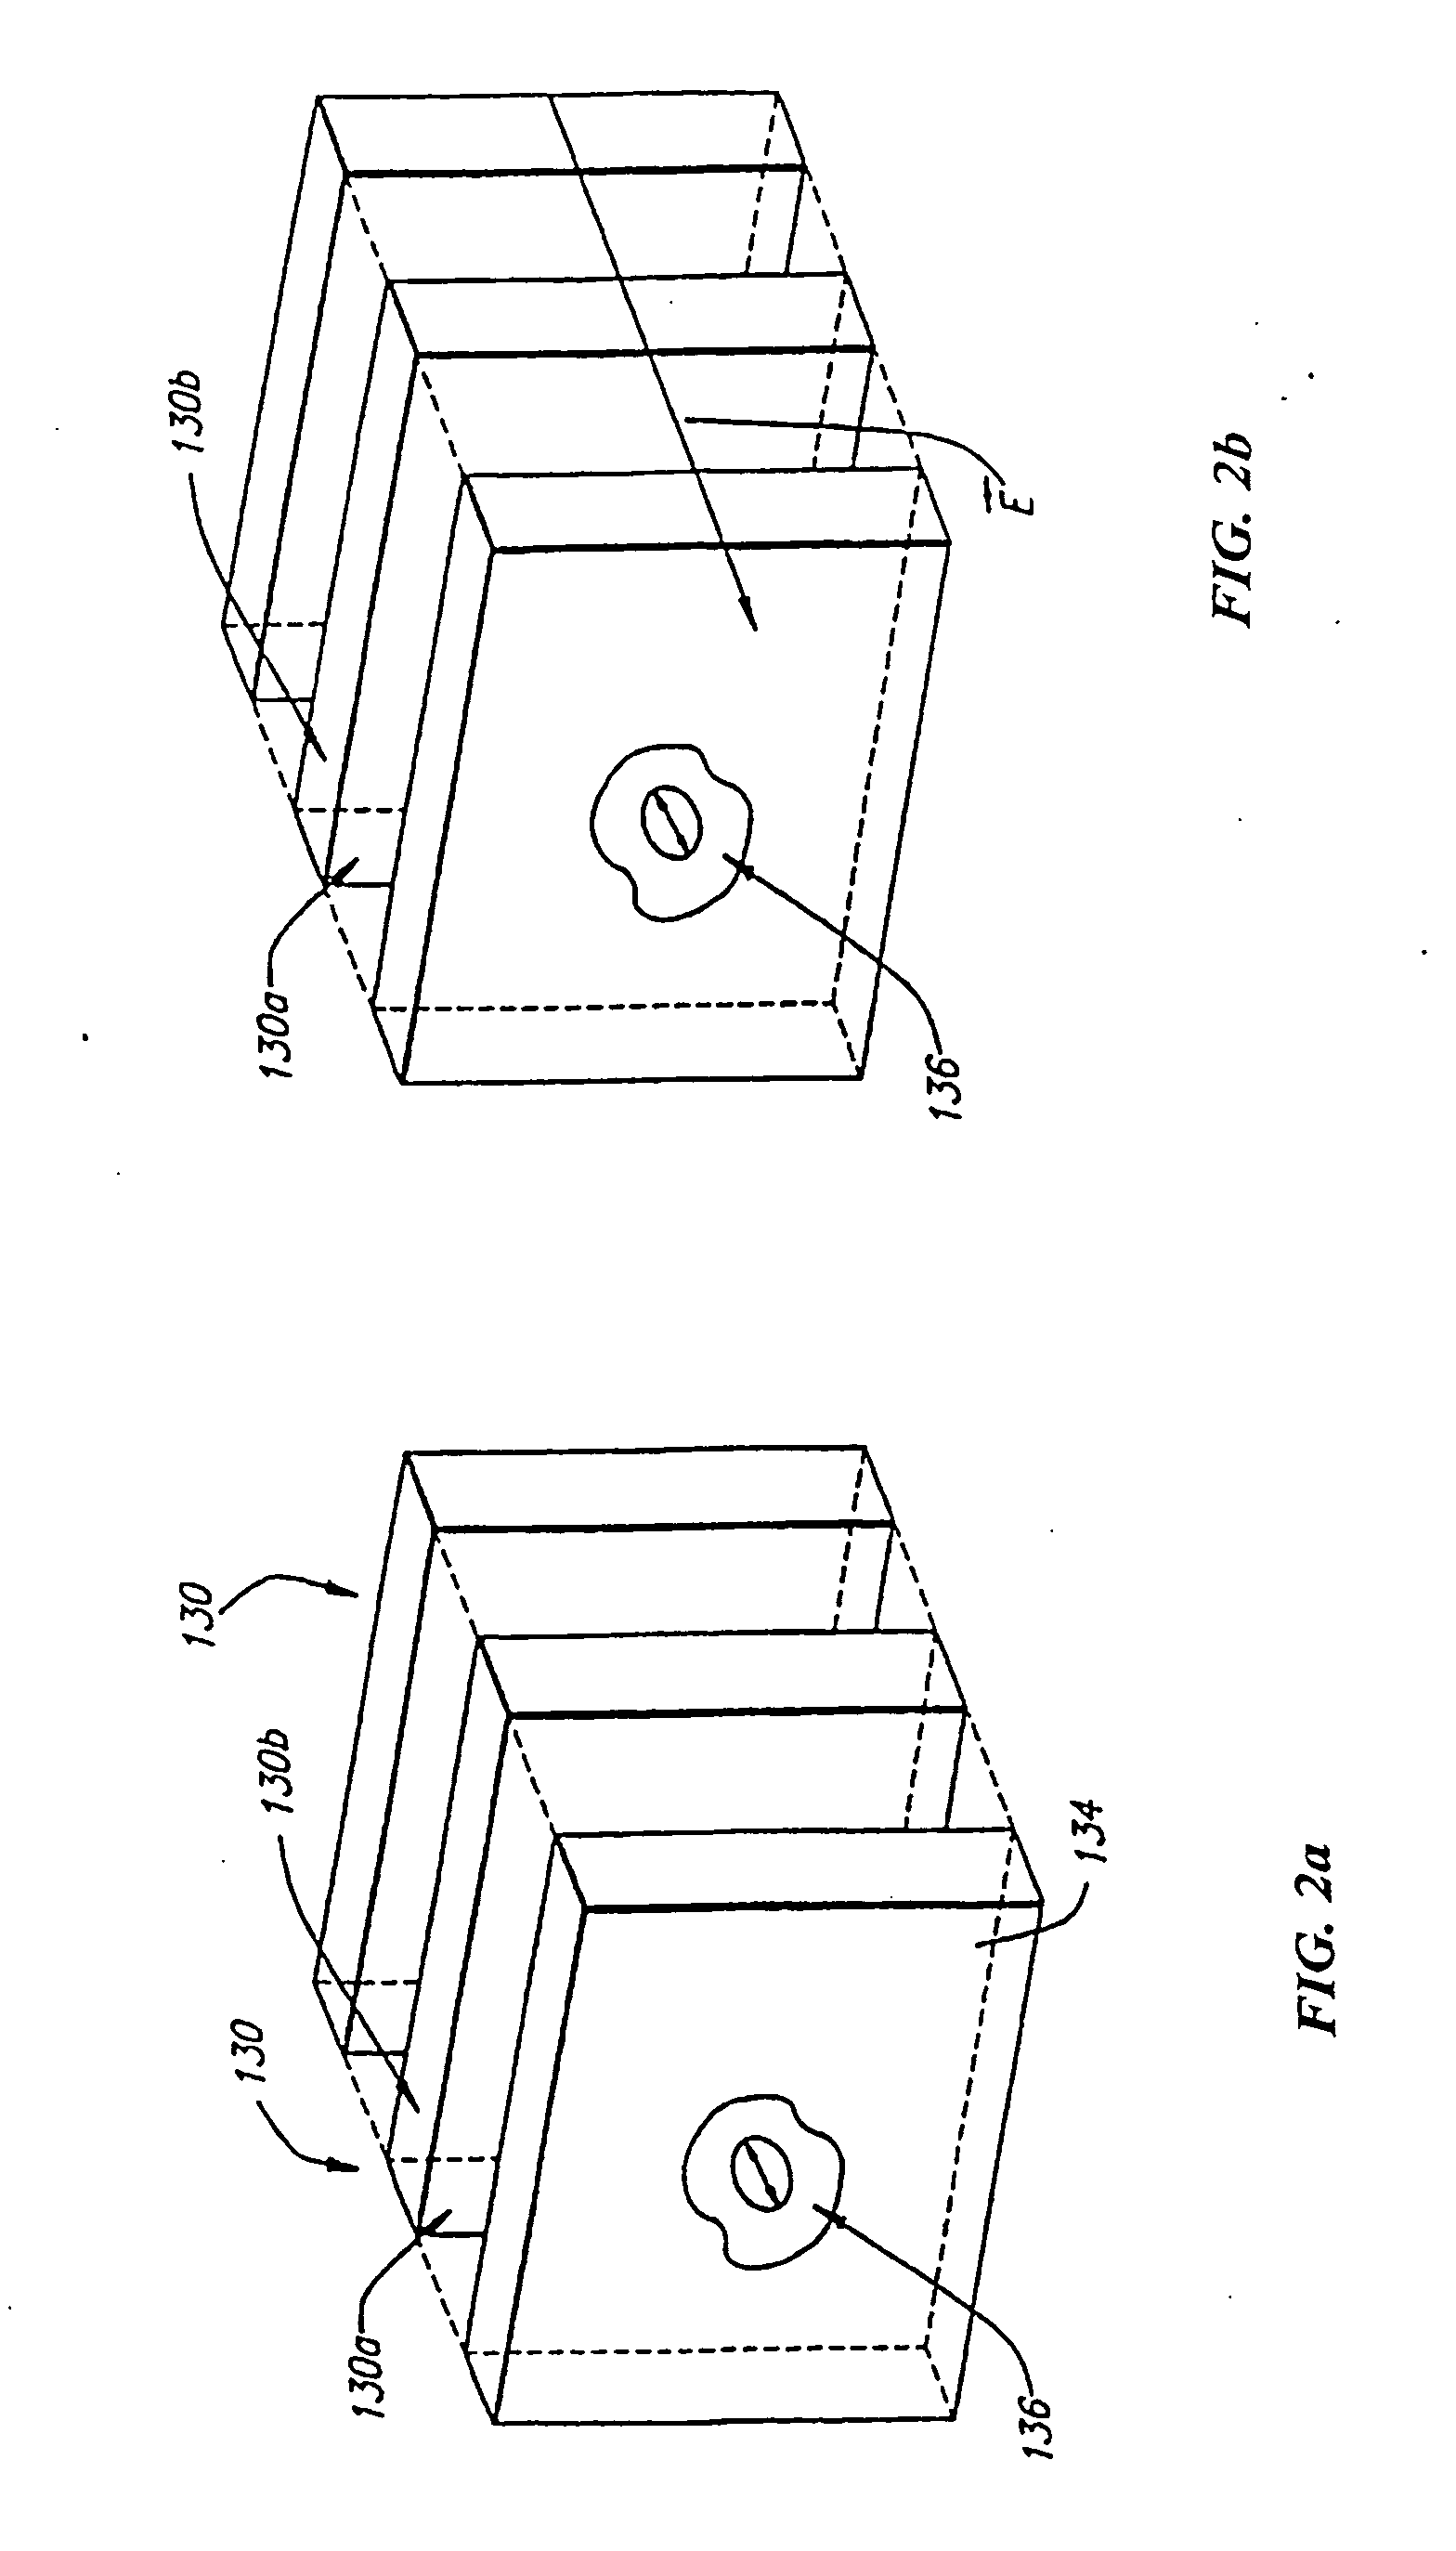 Switchable polymer-dispersed liquid crystal optical elements